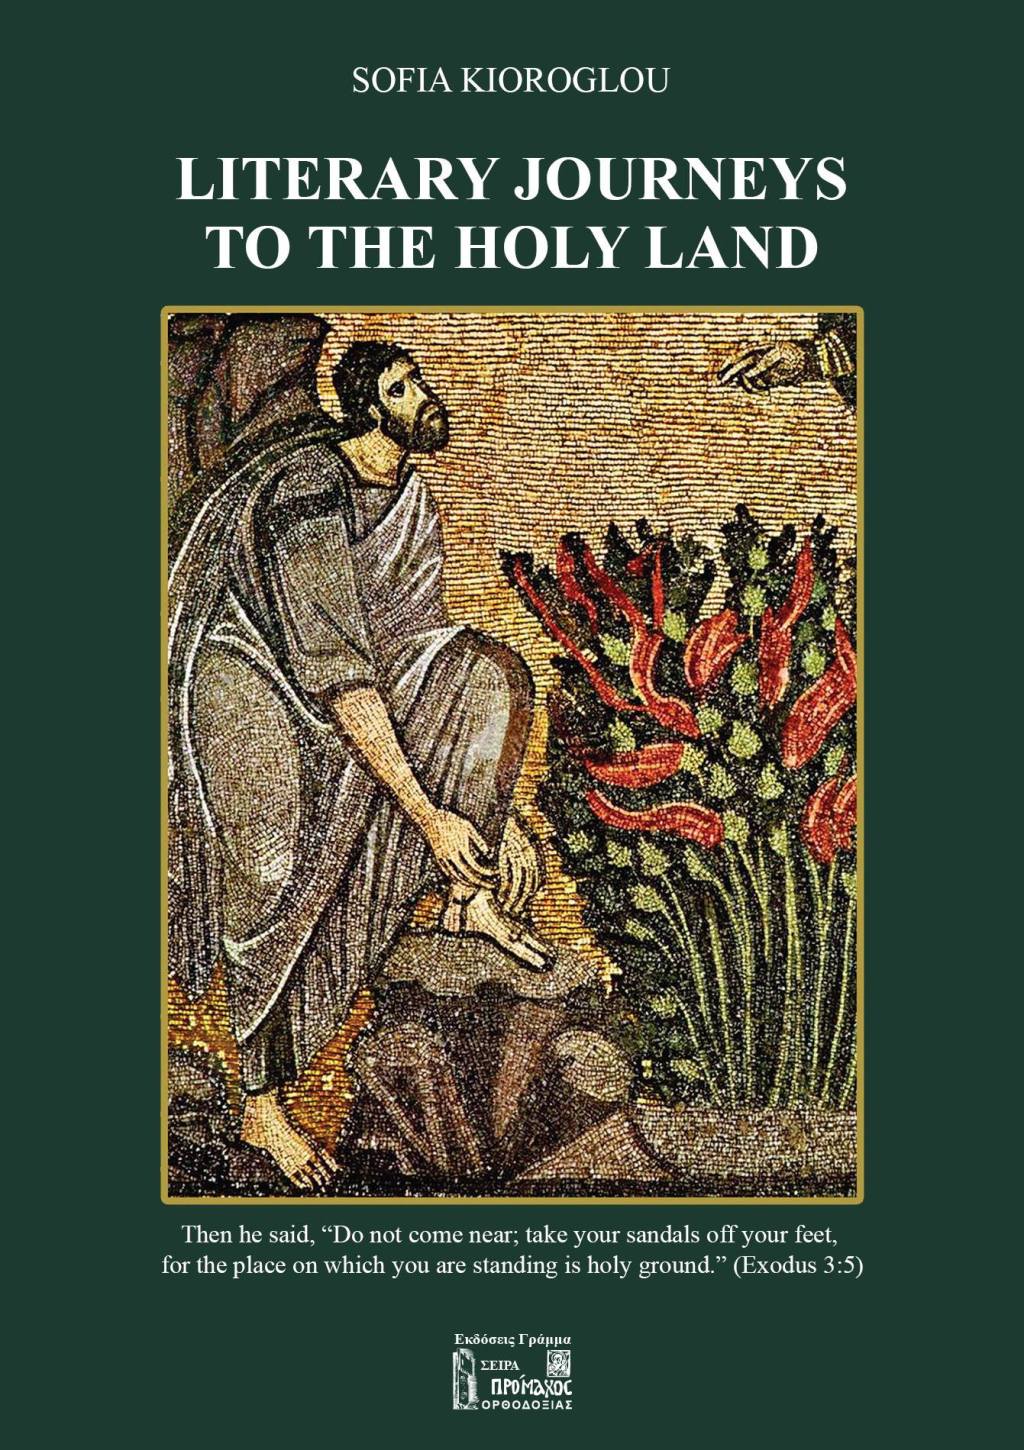 After a long delay, the English Edition of Literary Journeys to the Holy Land will come out in June